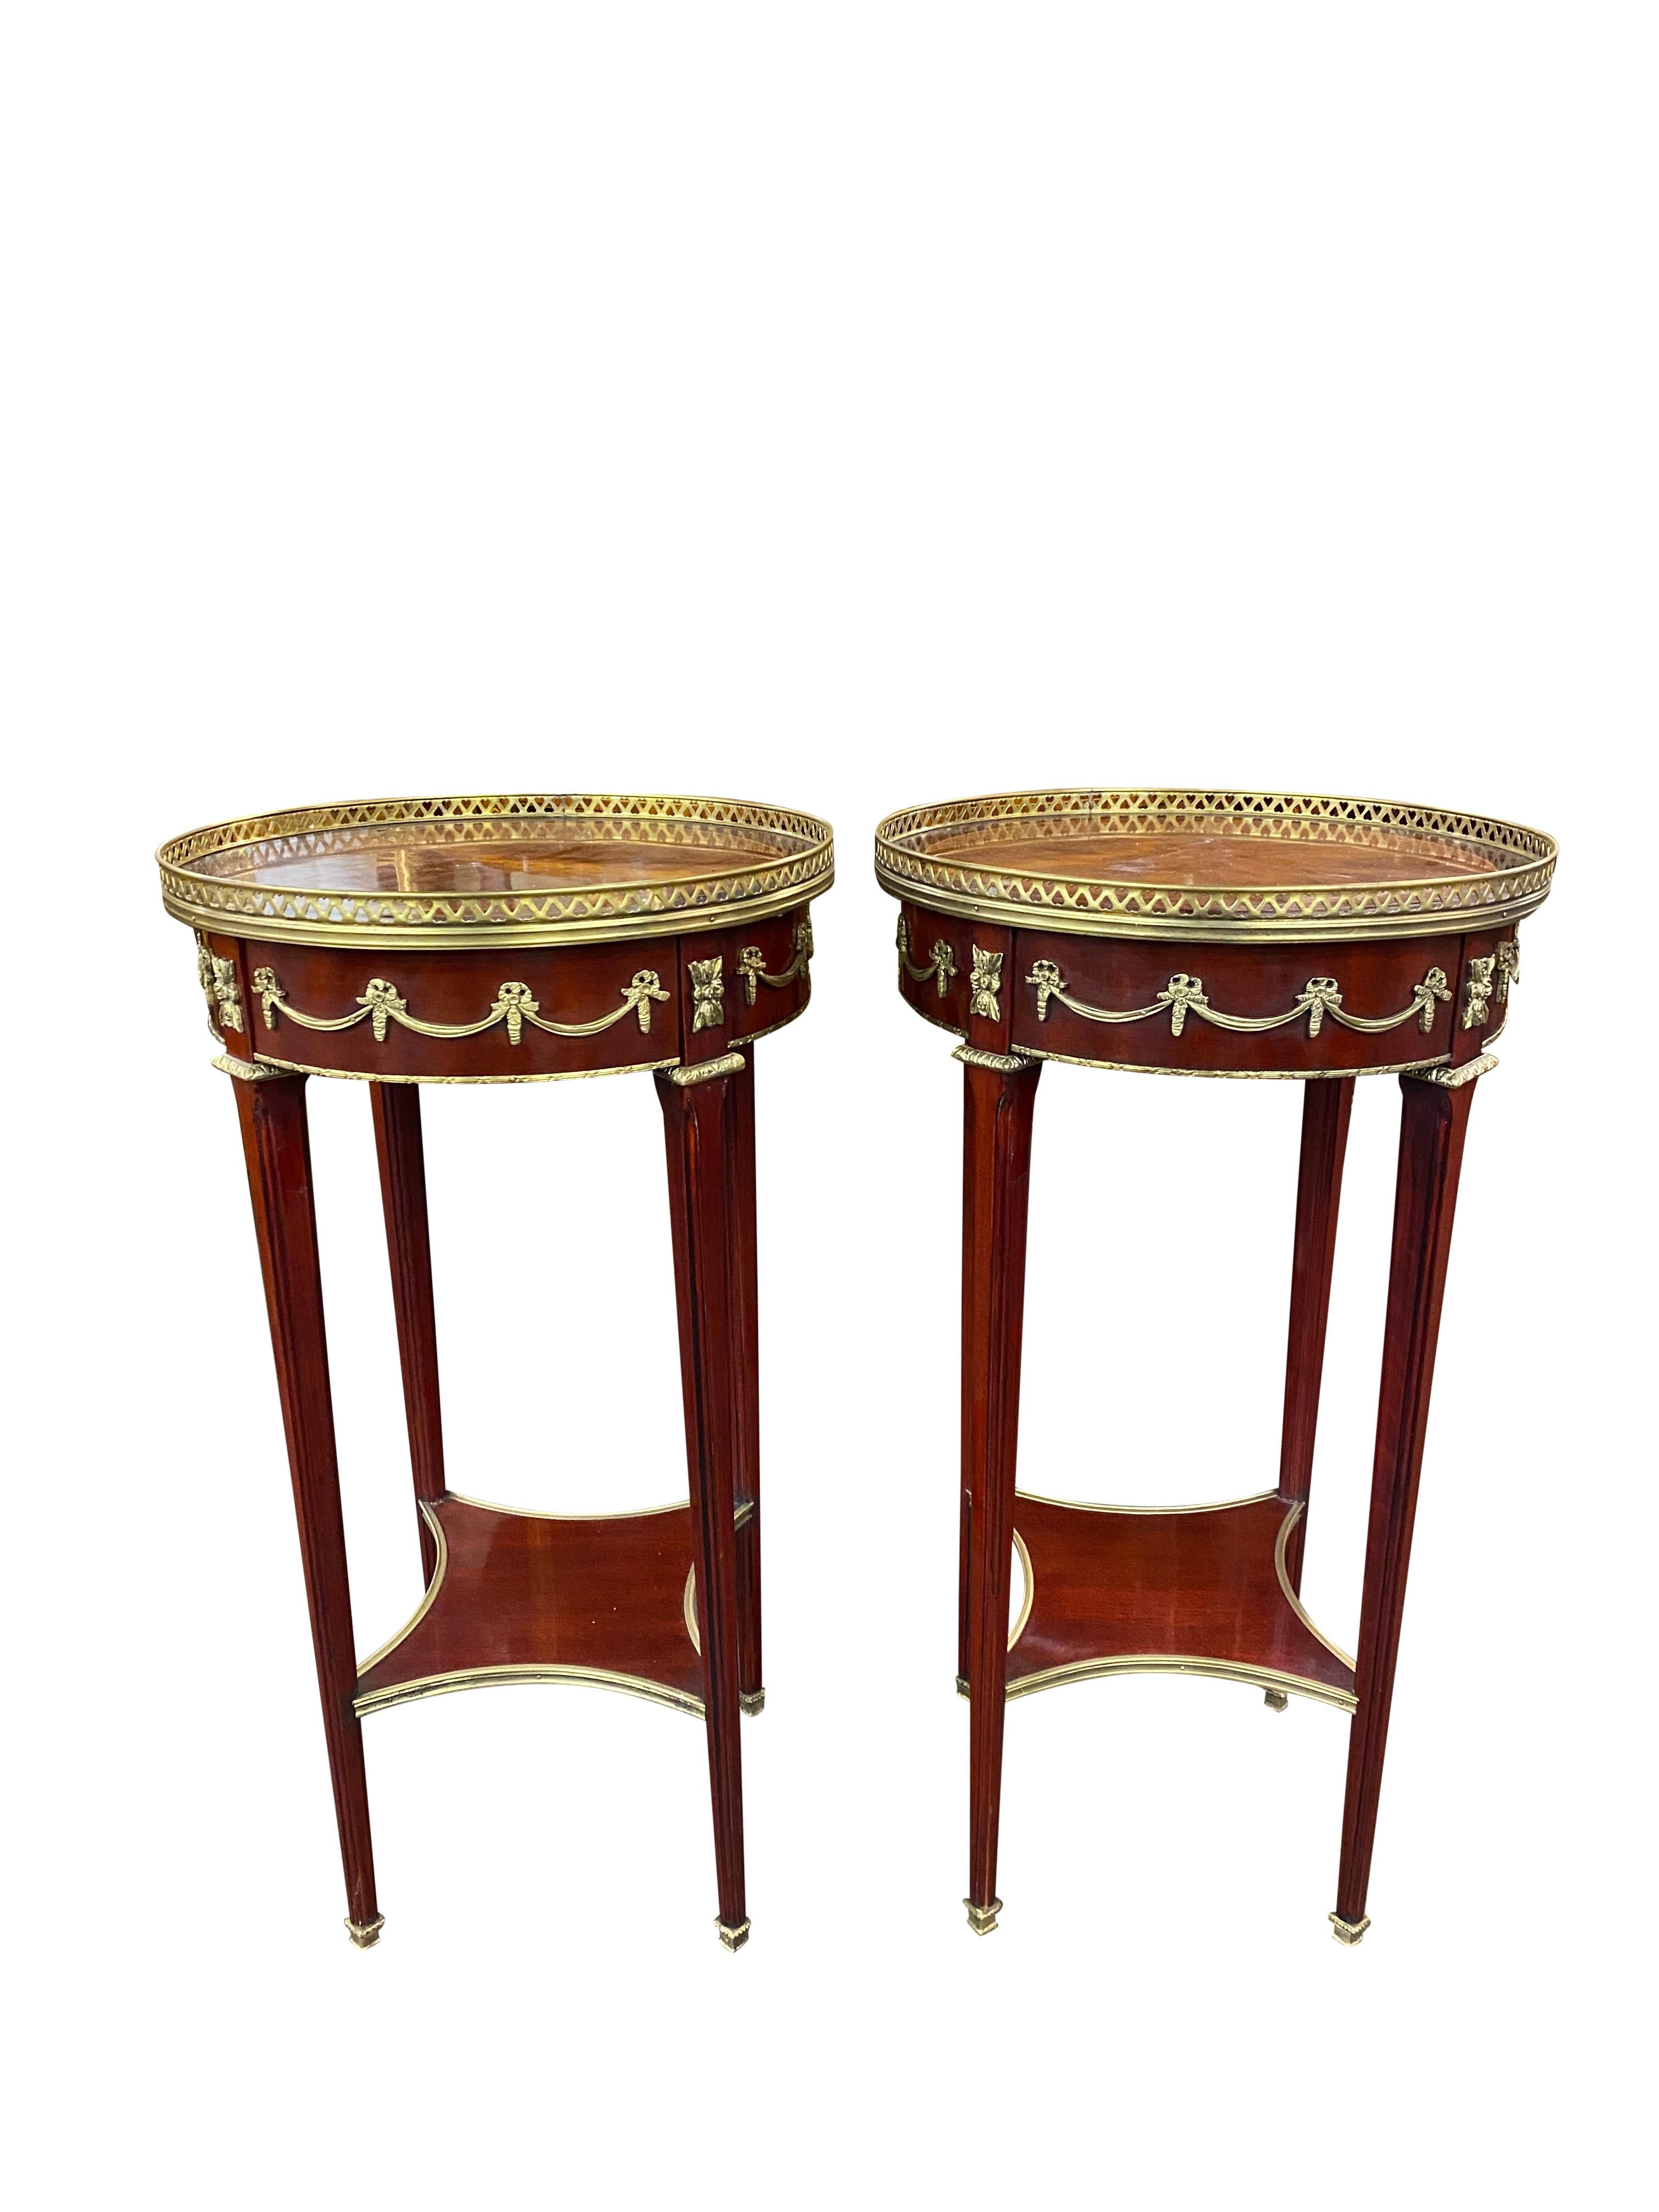 A stunning Pair of 20th Century Empire style side tables. A gorgeous and elegant design perfect for modern interiors.